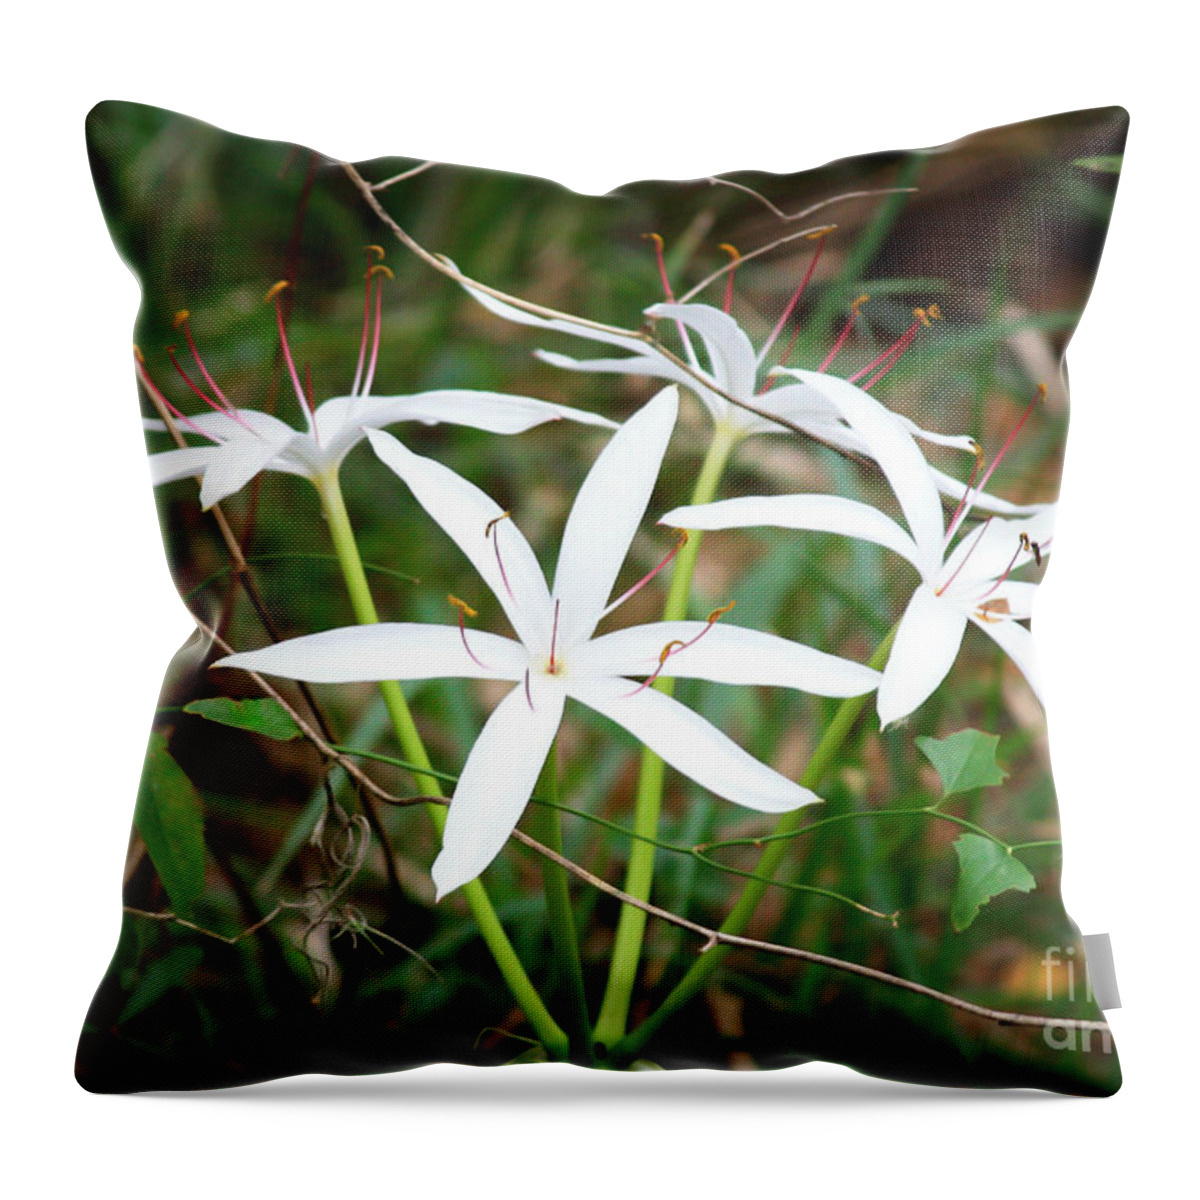 String Lily Throw Pillow featuring the photograph String Lily by Carol Groenen